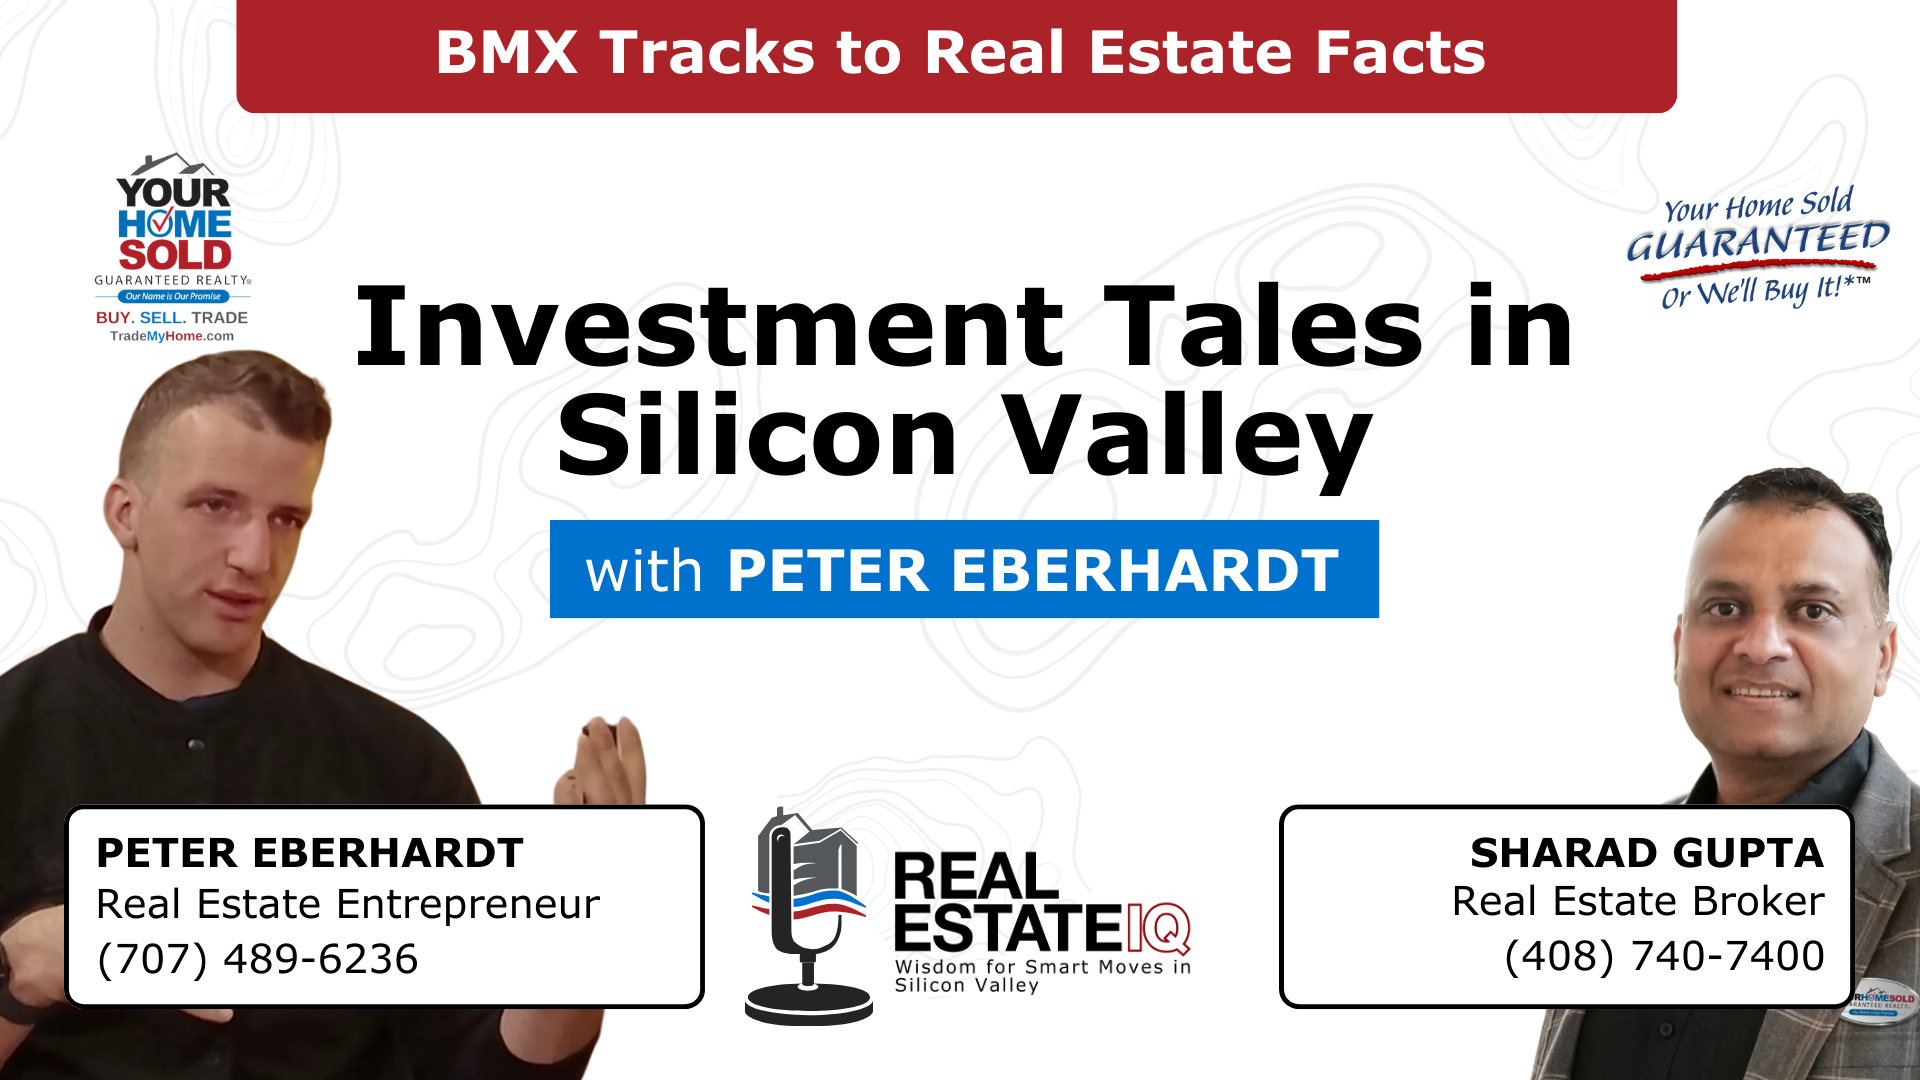 BMX Tracks to Real Estate Facts: Peter’s Silicon Valley Investment Tale Video